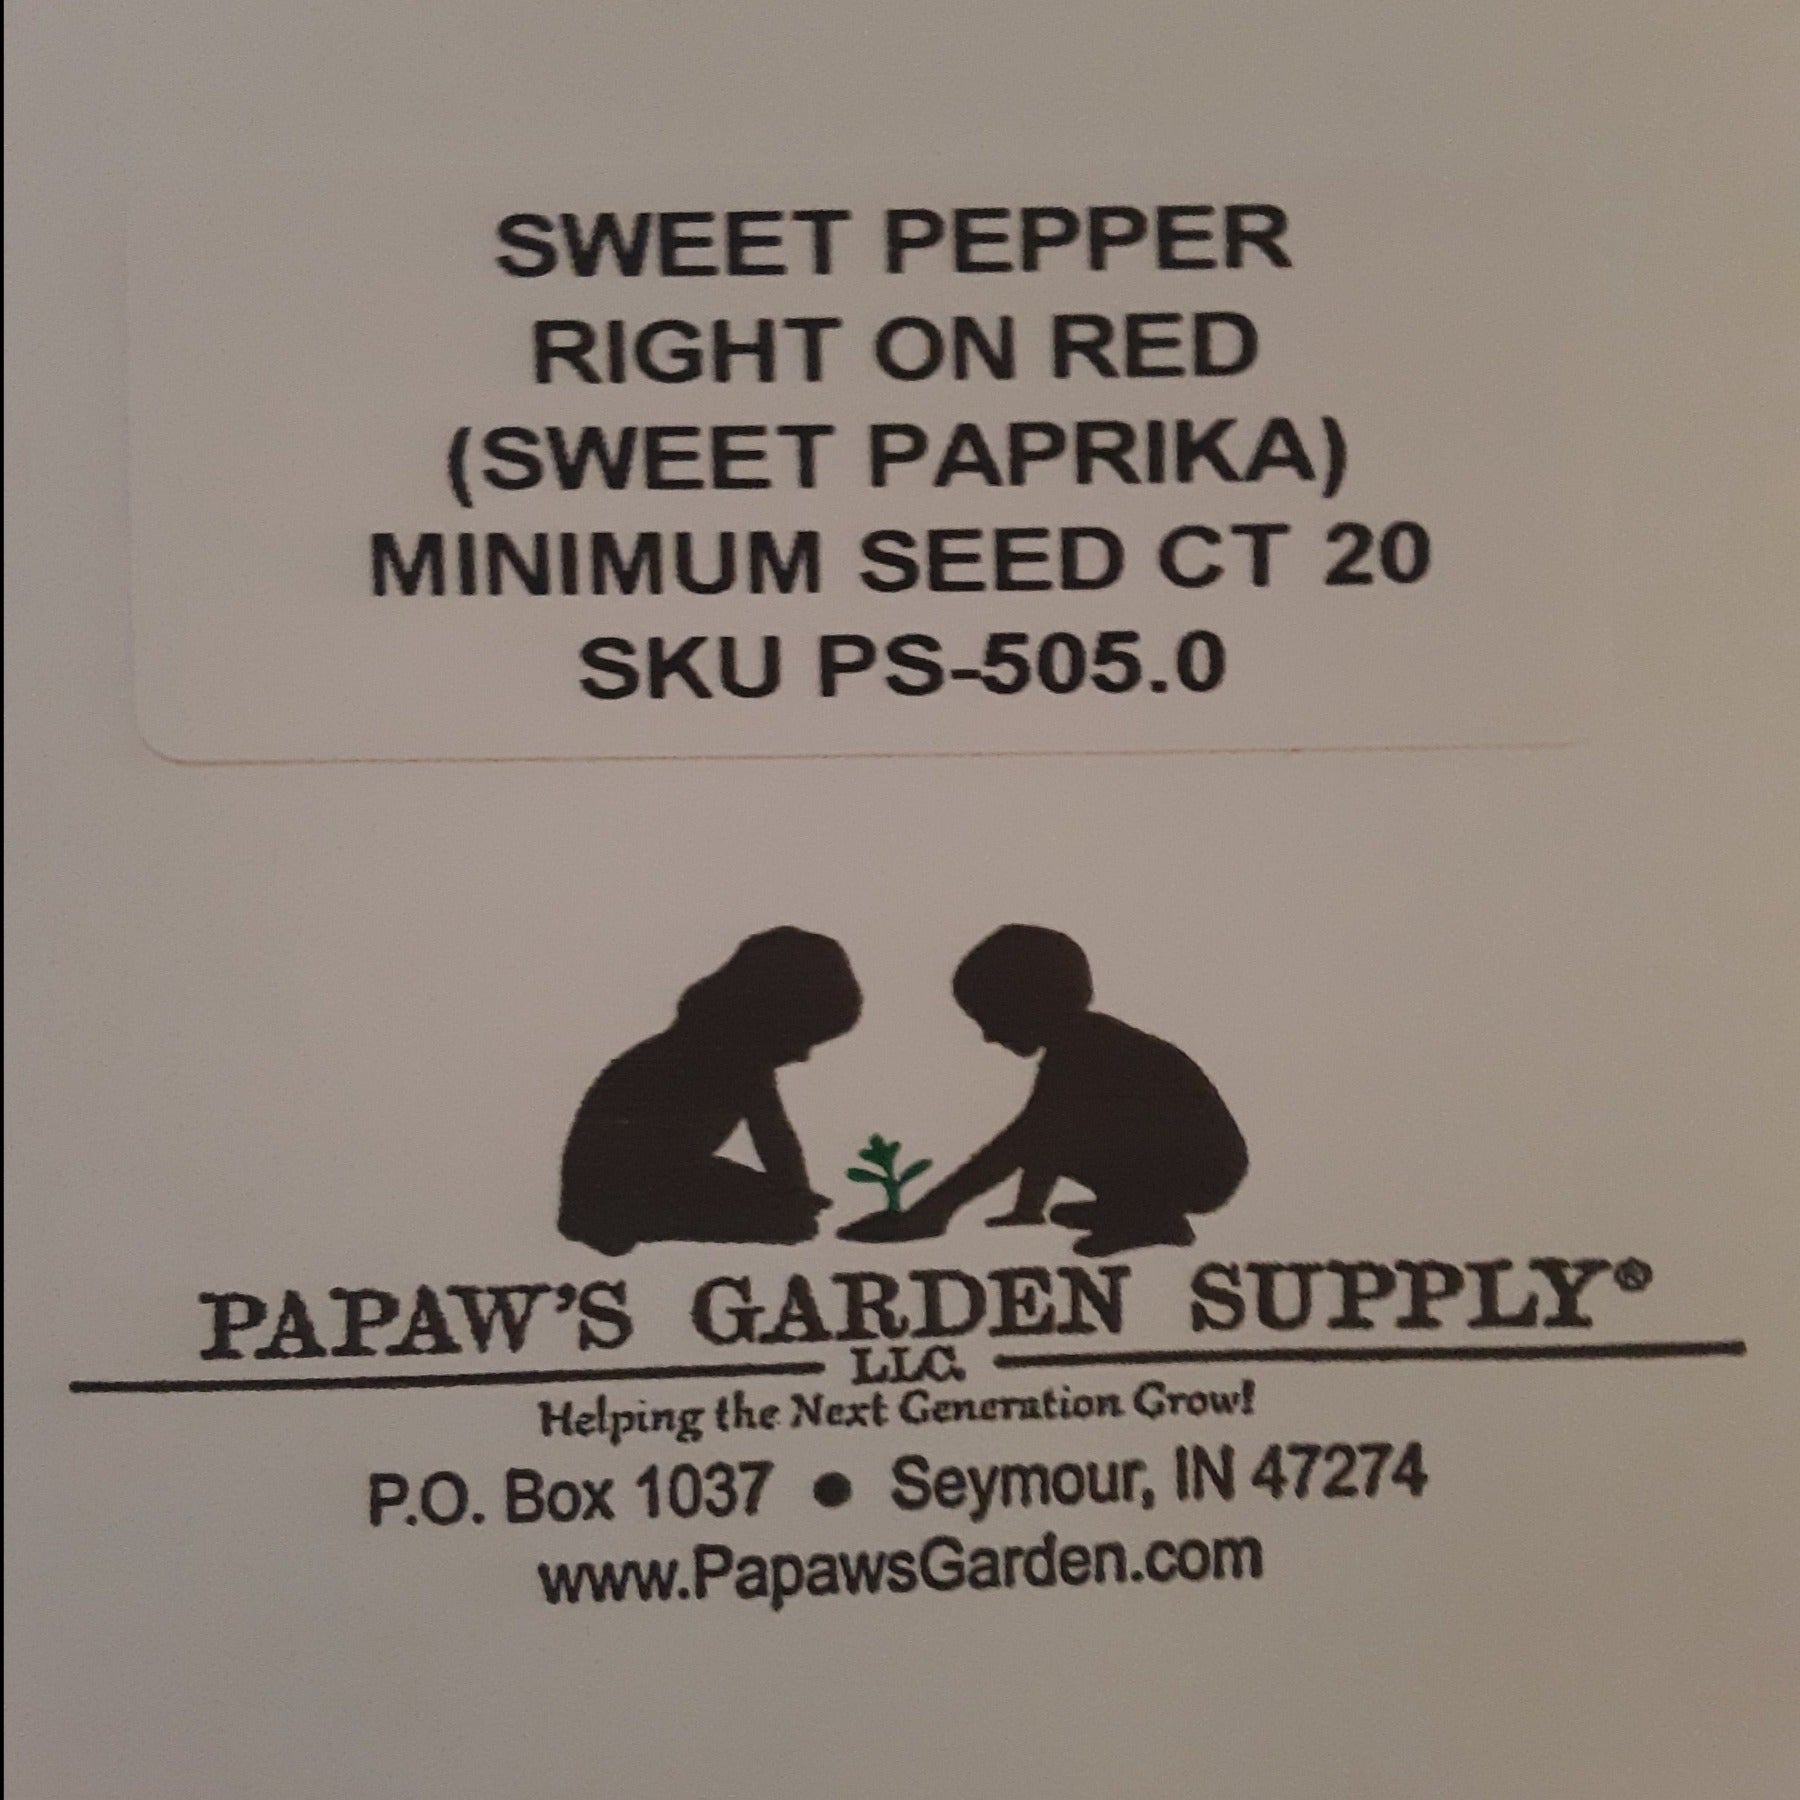 Right on Red Hybrid Sweet Paprika Pepper Seeds